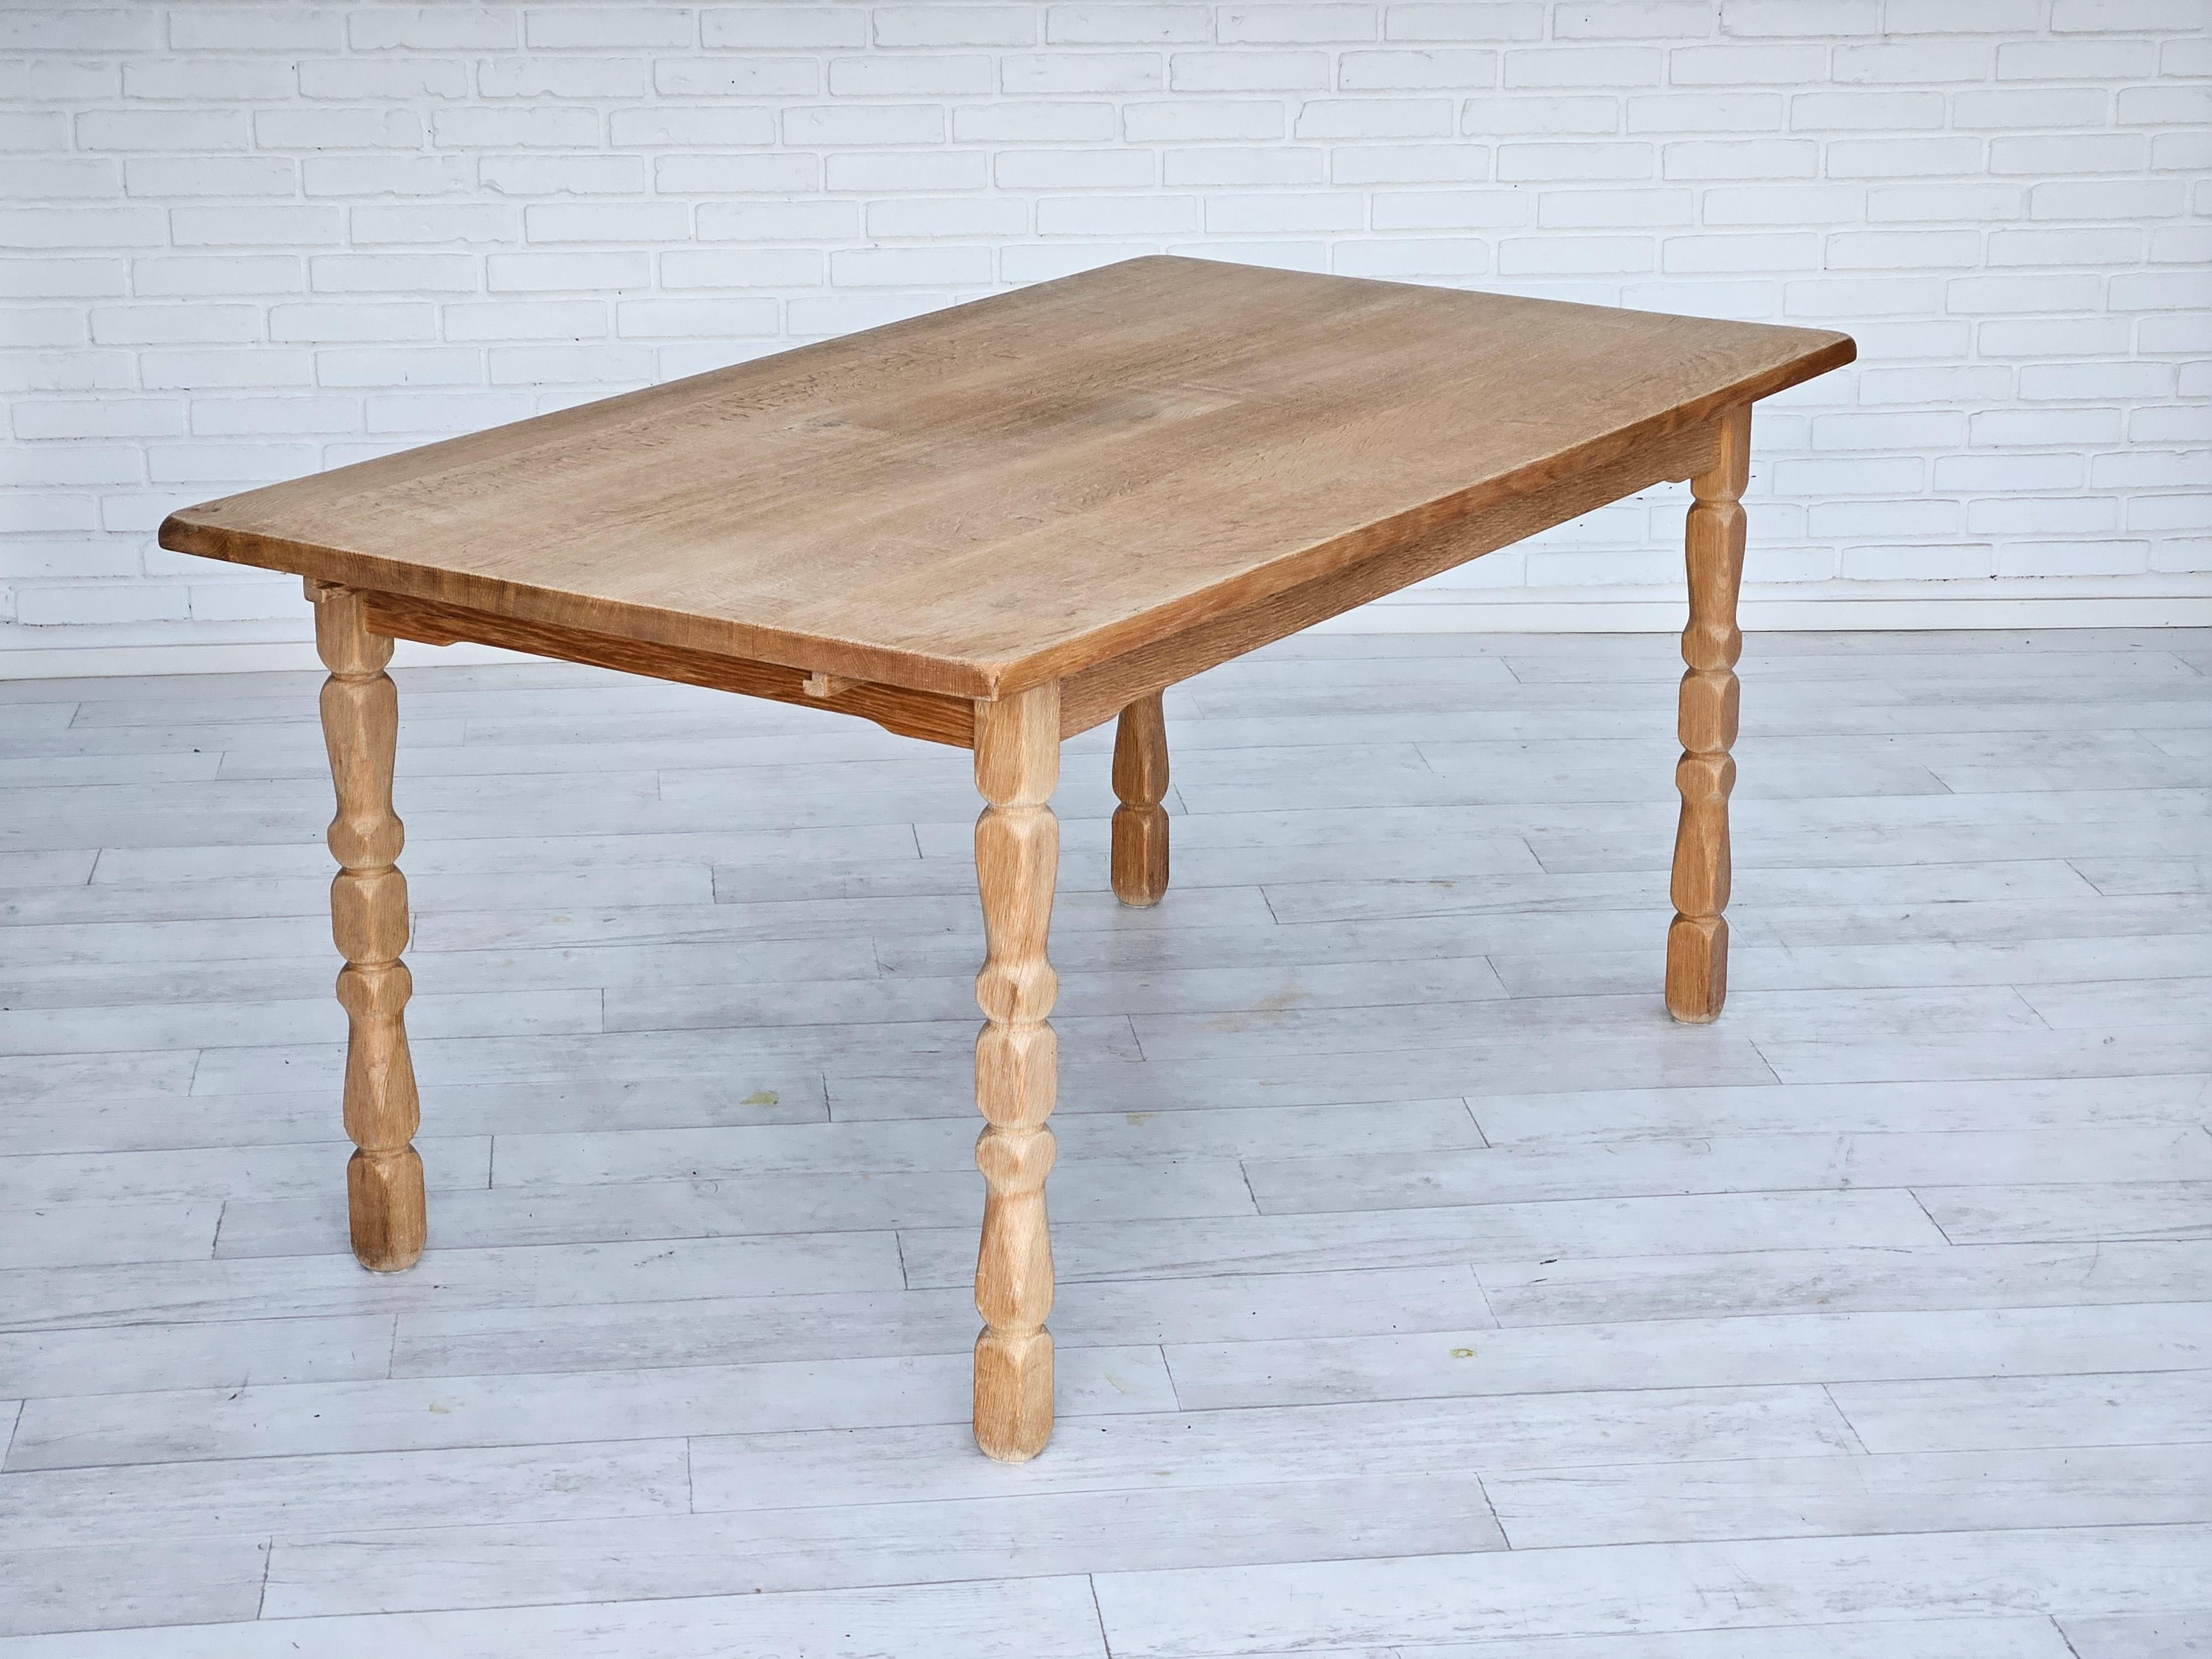 1970s, Danish oak wood dining table in rectangle shape. Solid oak wood. Original very good condition. Removable legs, 2 additional table plates. Manufactured by Danish furniture manufacturer in about 1970s.